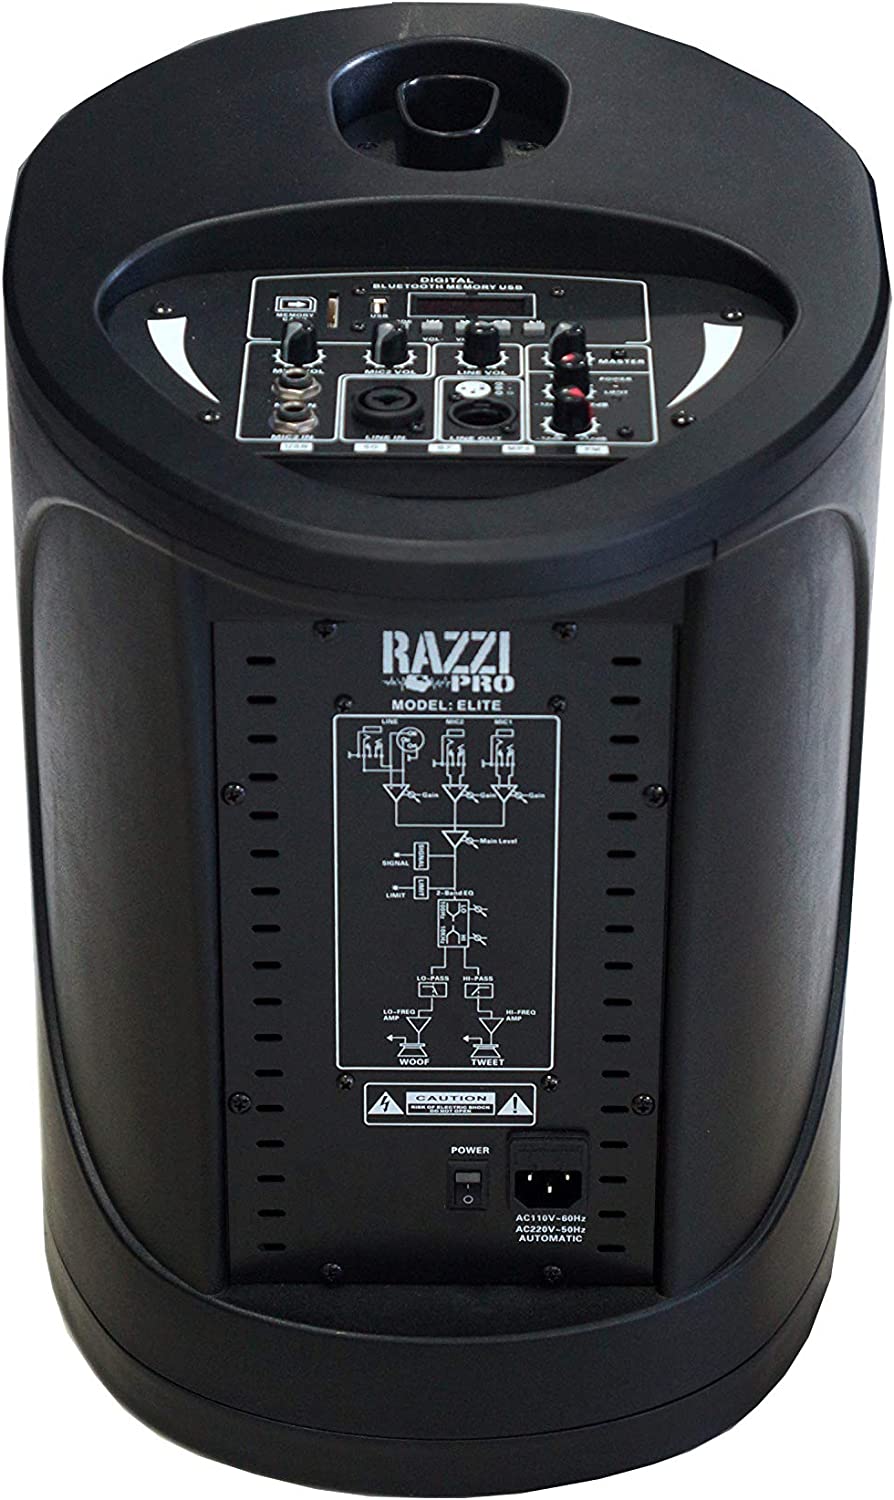 Razzi PRO Elite Line Array All in one 8" Subwoofer with 2 Section Tower with 4 x 3" Bluetooth Portable PA DJ Speaker